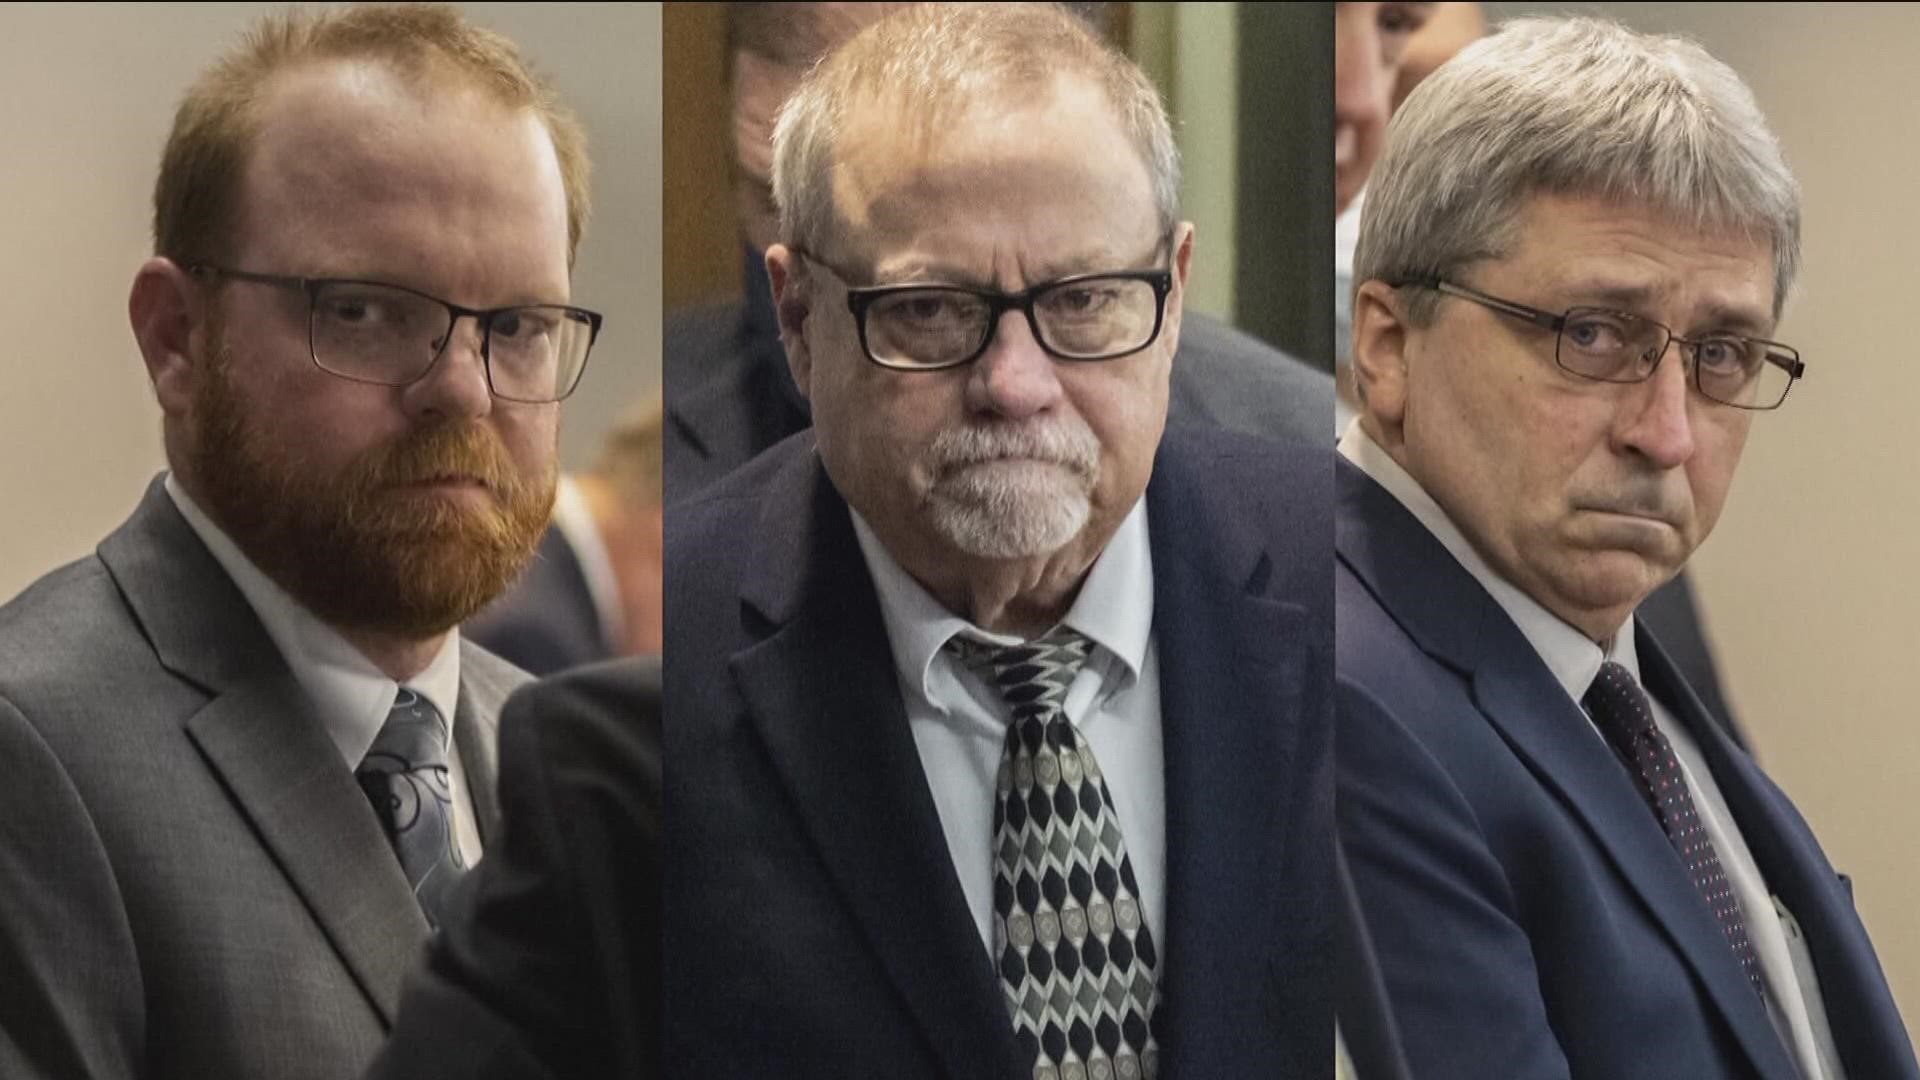 The dates for their sentencing hearings were released on Tuesday.